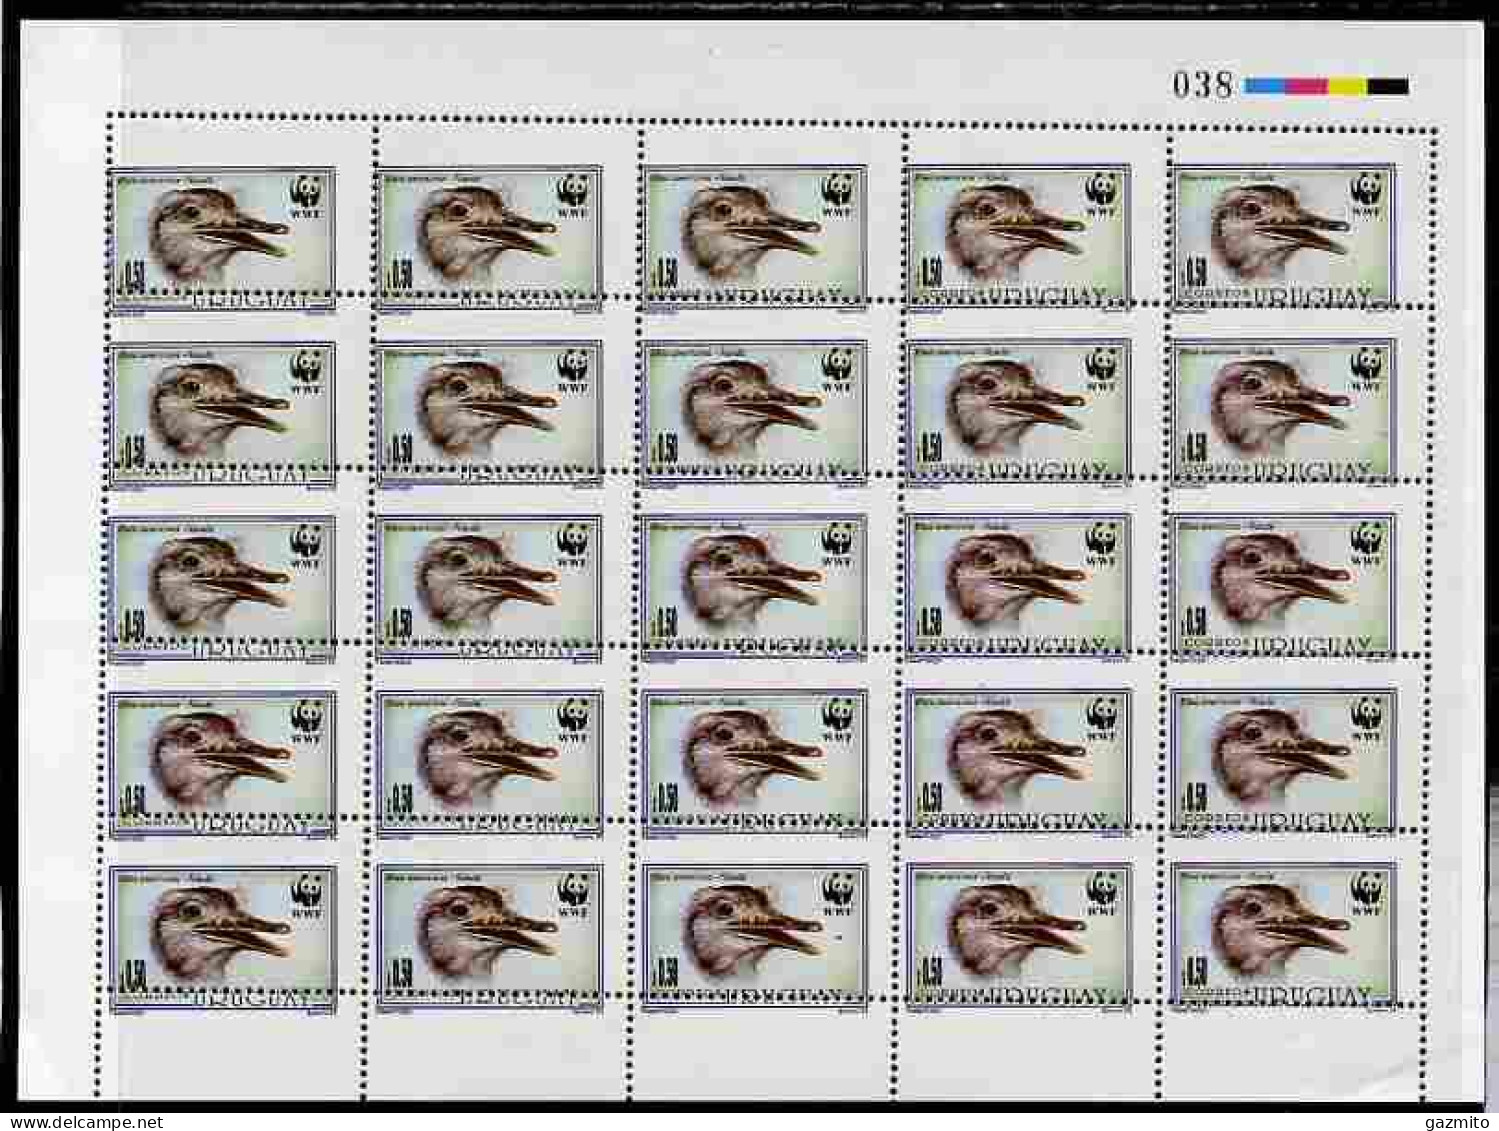 Uruguay 1993, WWF The Great Rhea 50c Complete Sheet Of 25 With Perforations Misplaced Obliquely, Sheetlet - Neufs